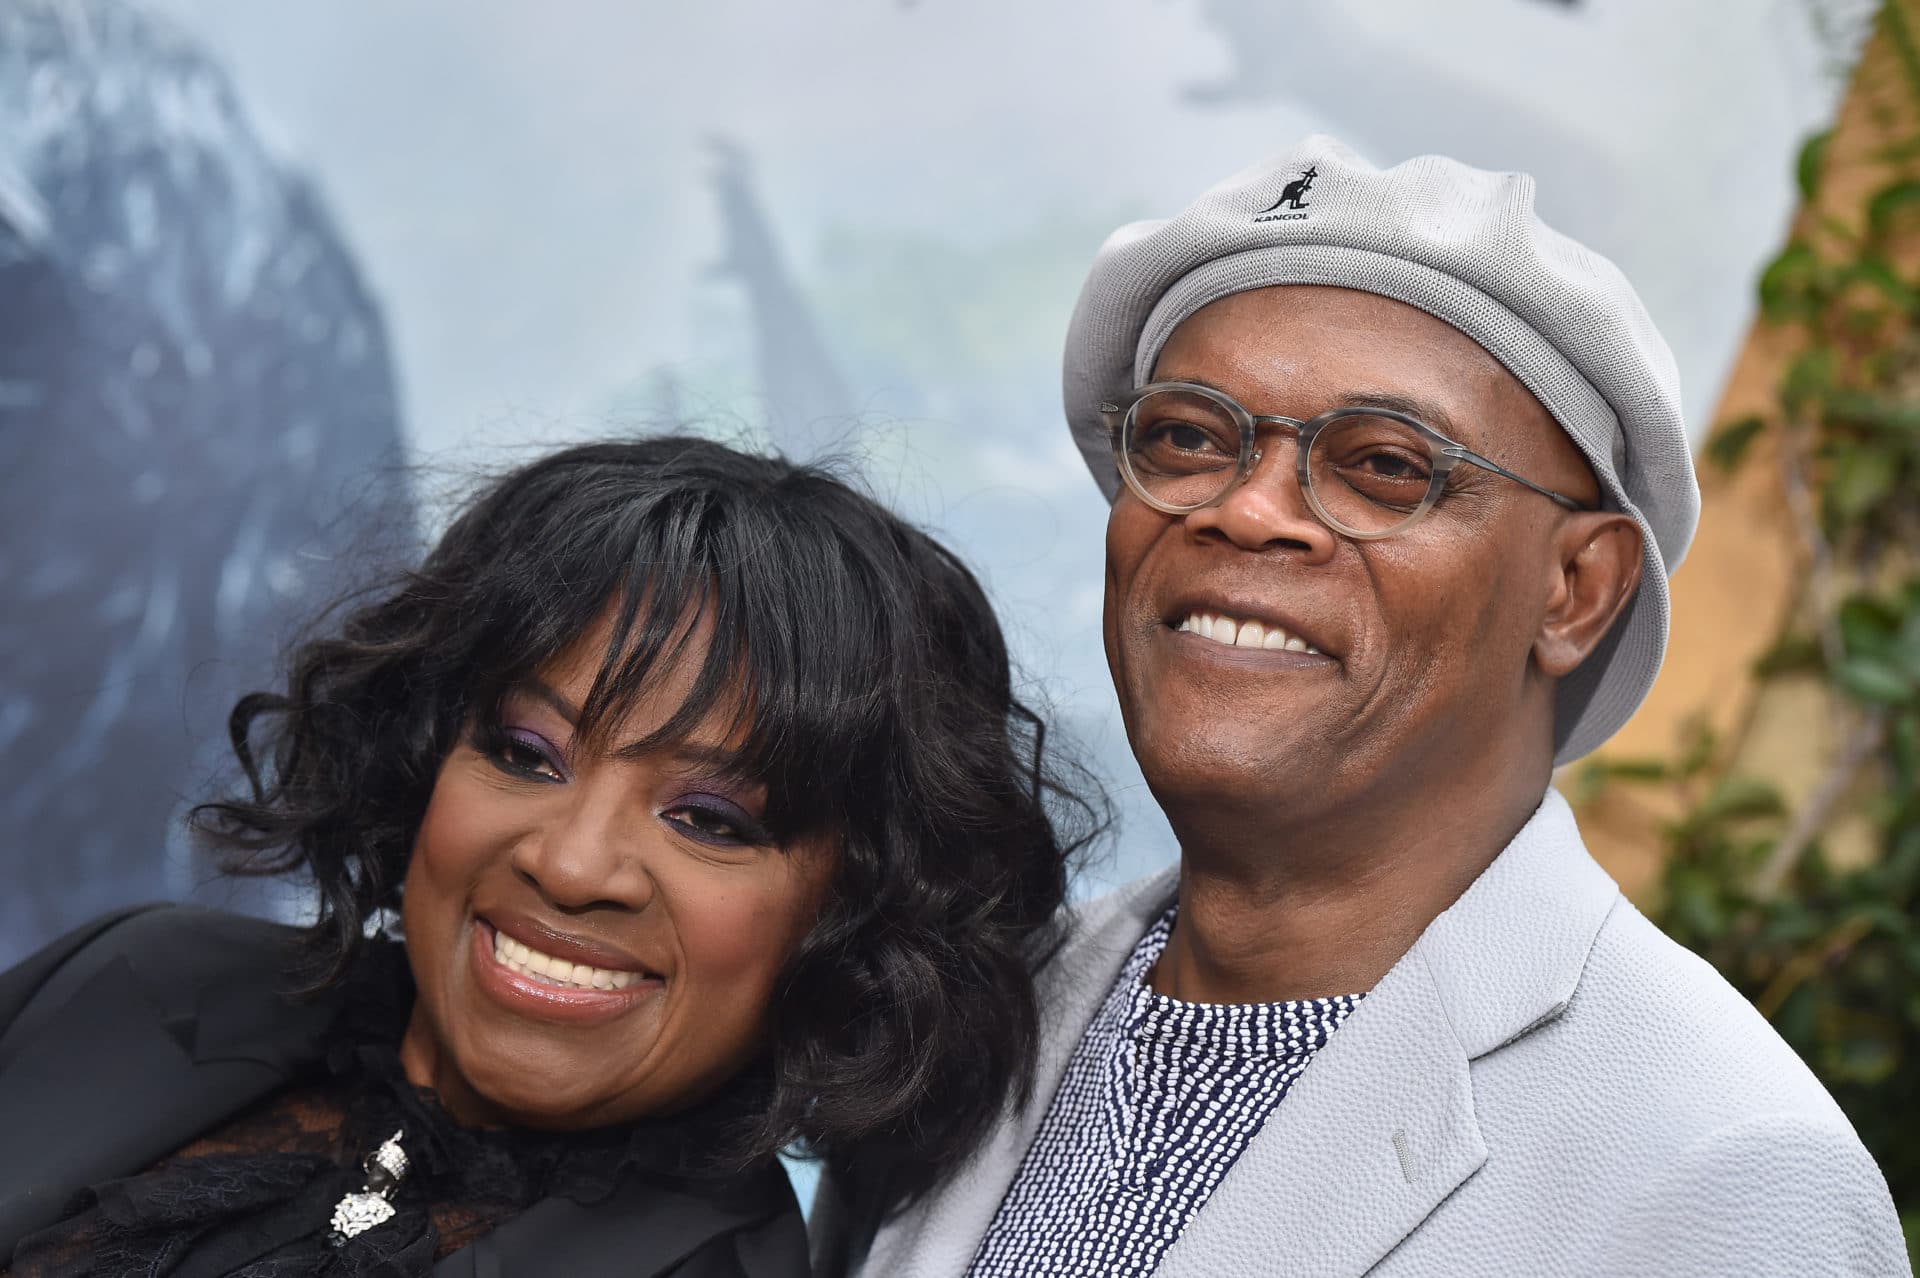 Watch Samuel L. Jackson Share What Makes His Love With Wife LaTanya Jackson Revolutionary